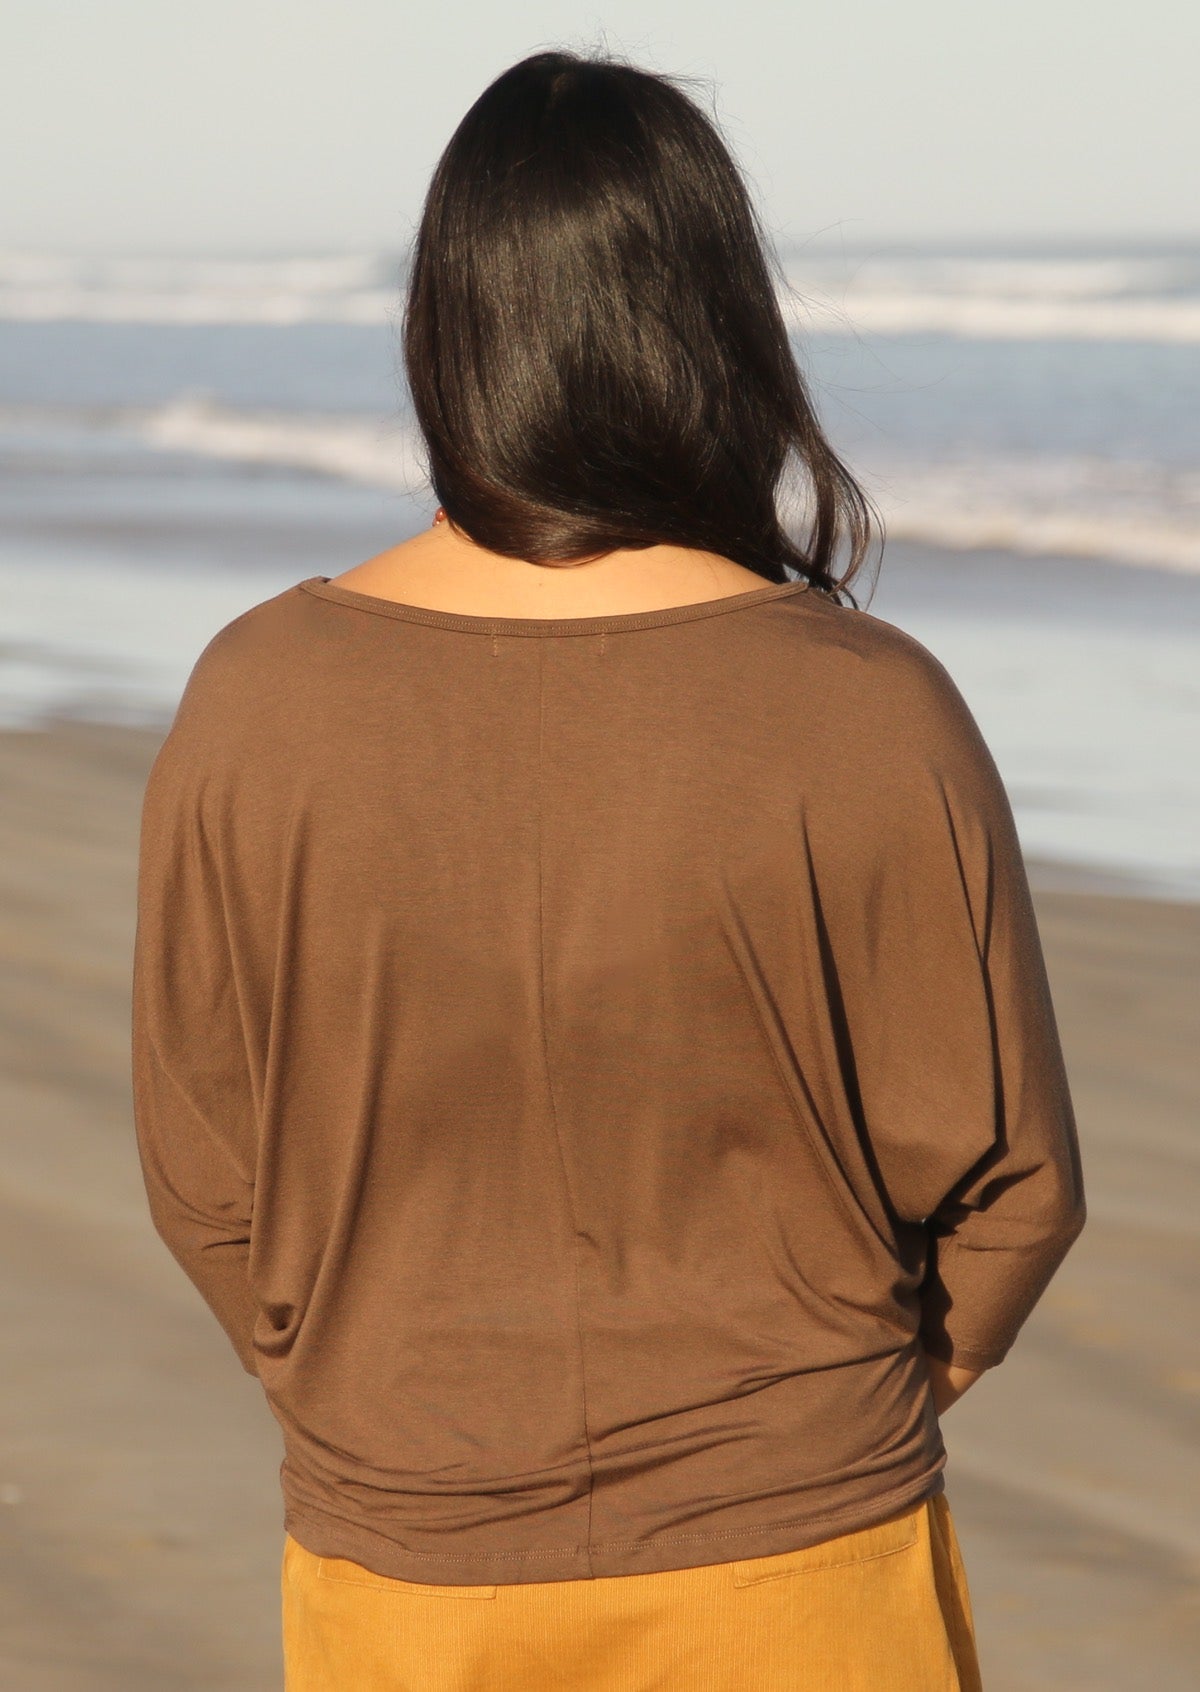 Back view of woman wearing a 3/4 sleeve rayon batwing round neckline brown top.